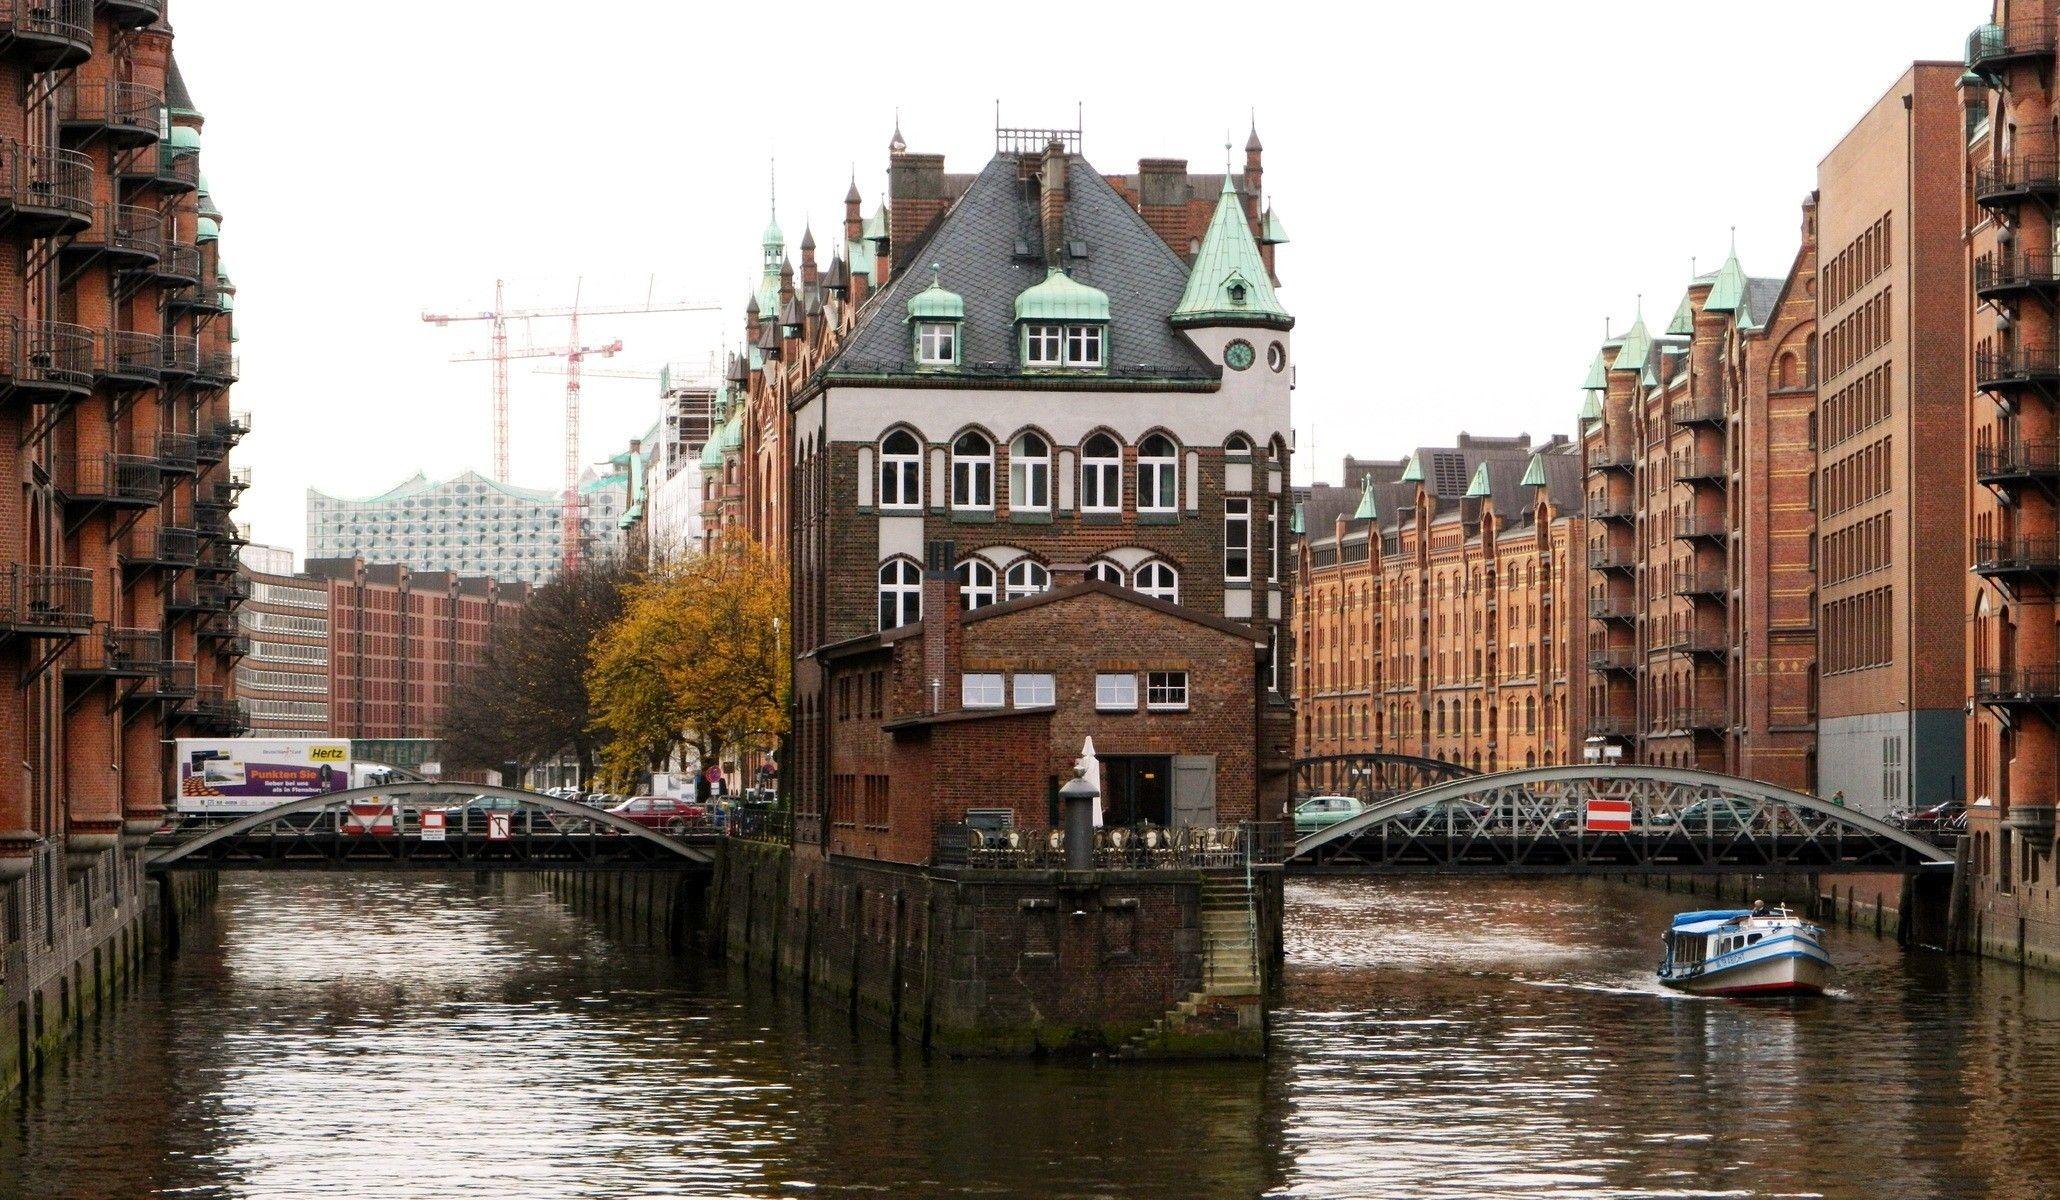 Other: HAMBURG Germany Houses Monuments City Old Harbor Architecture